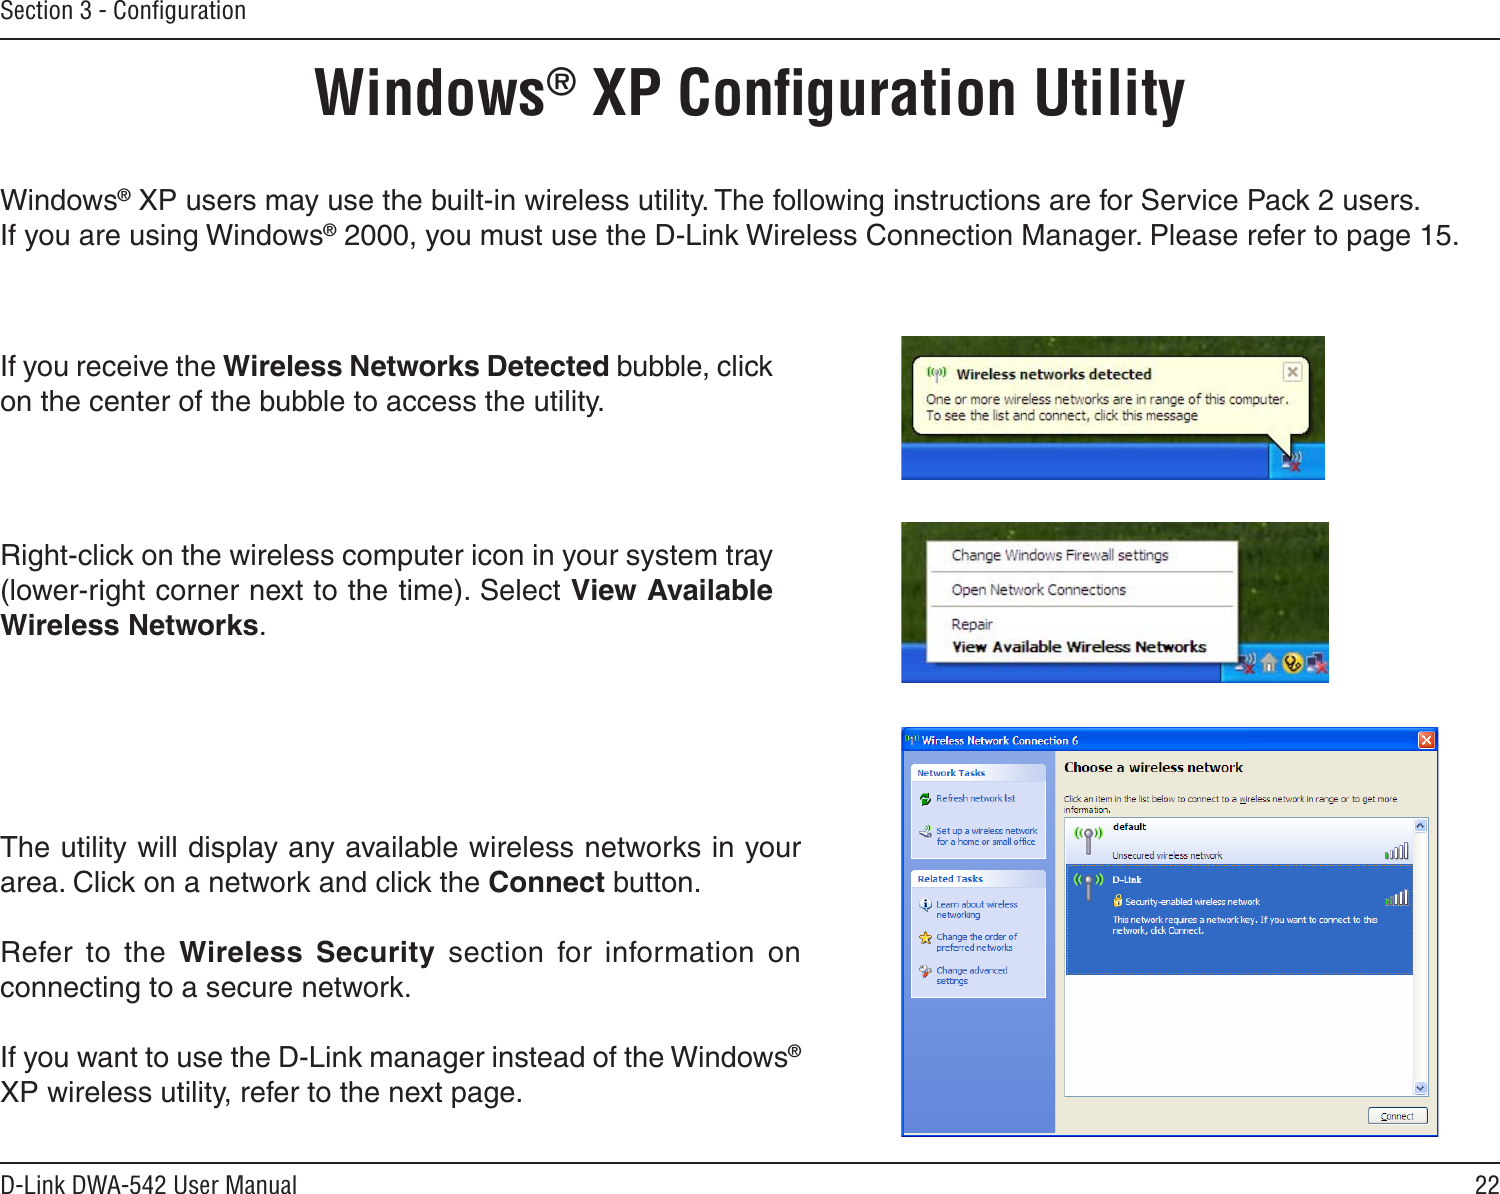 22D-Link DWA-542 User ManualSection 3 - ConﬁgurationWindows® XP Conﬁguration UtilityWindows® XP users may use the built-in wireless utility. The following instructions are for Service Pack 2 users. If you are using Windows® 2000, you must use the D-Link Wireless Connection Manager. Please refer to page 15.Right-click on the wireless computer icon in your system tray (lower-right corner next to the time). Select View Available Wireless Networks.If you receive the Wireless Networks Detected bubble, click on the center of the bubble to access the utility.The utility will display any available wireless networks in your area. Click on a network and click the Connect button.Refer  to  the  Wireless  Security  section  for  information  on connecting to a secure network.If you want to use the D-Link manager instead of the Windows® XP wireless utility, refer to the next page.